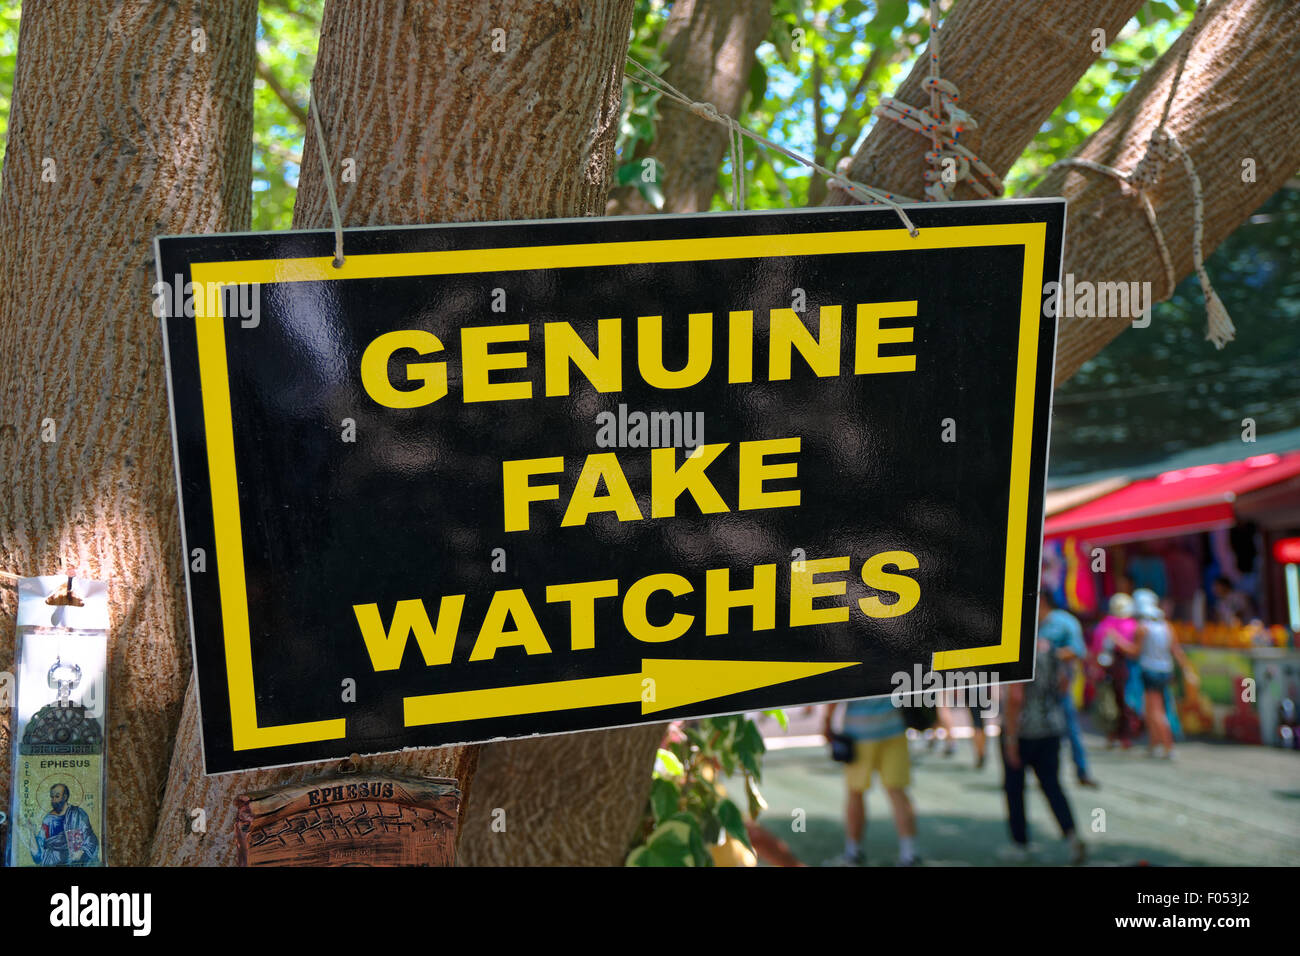 Genuine Fake Watches sign in a Turkish market. Stock Photo